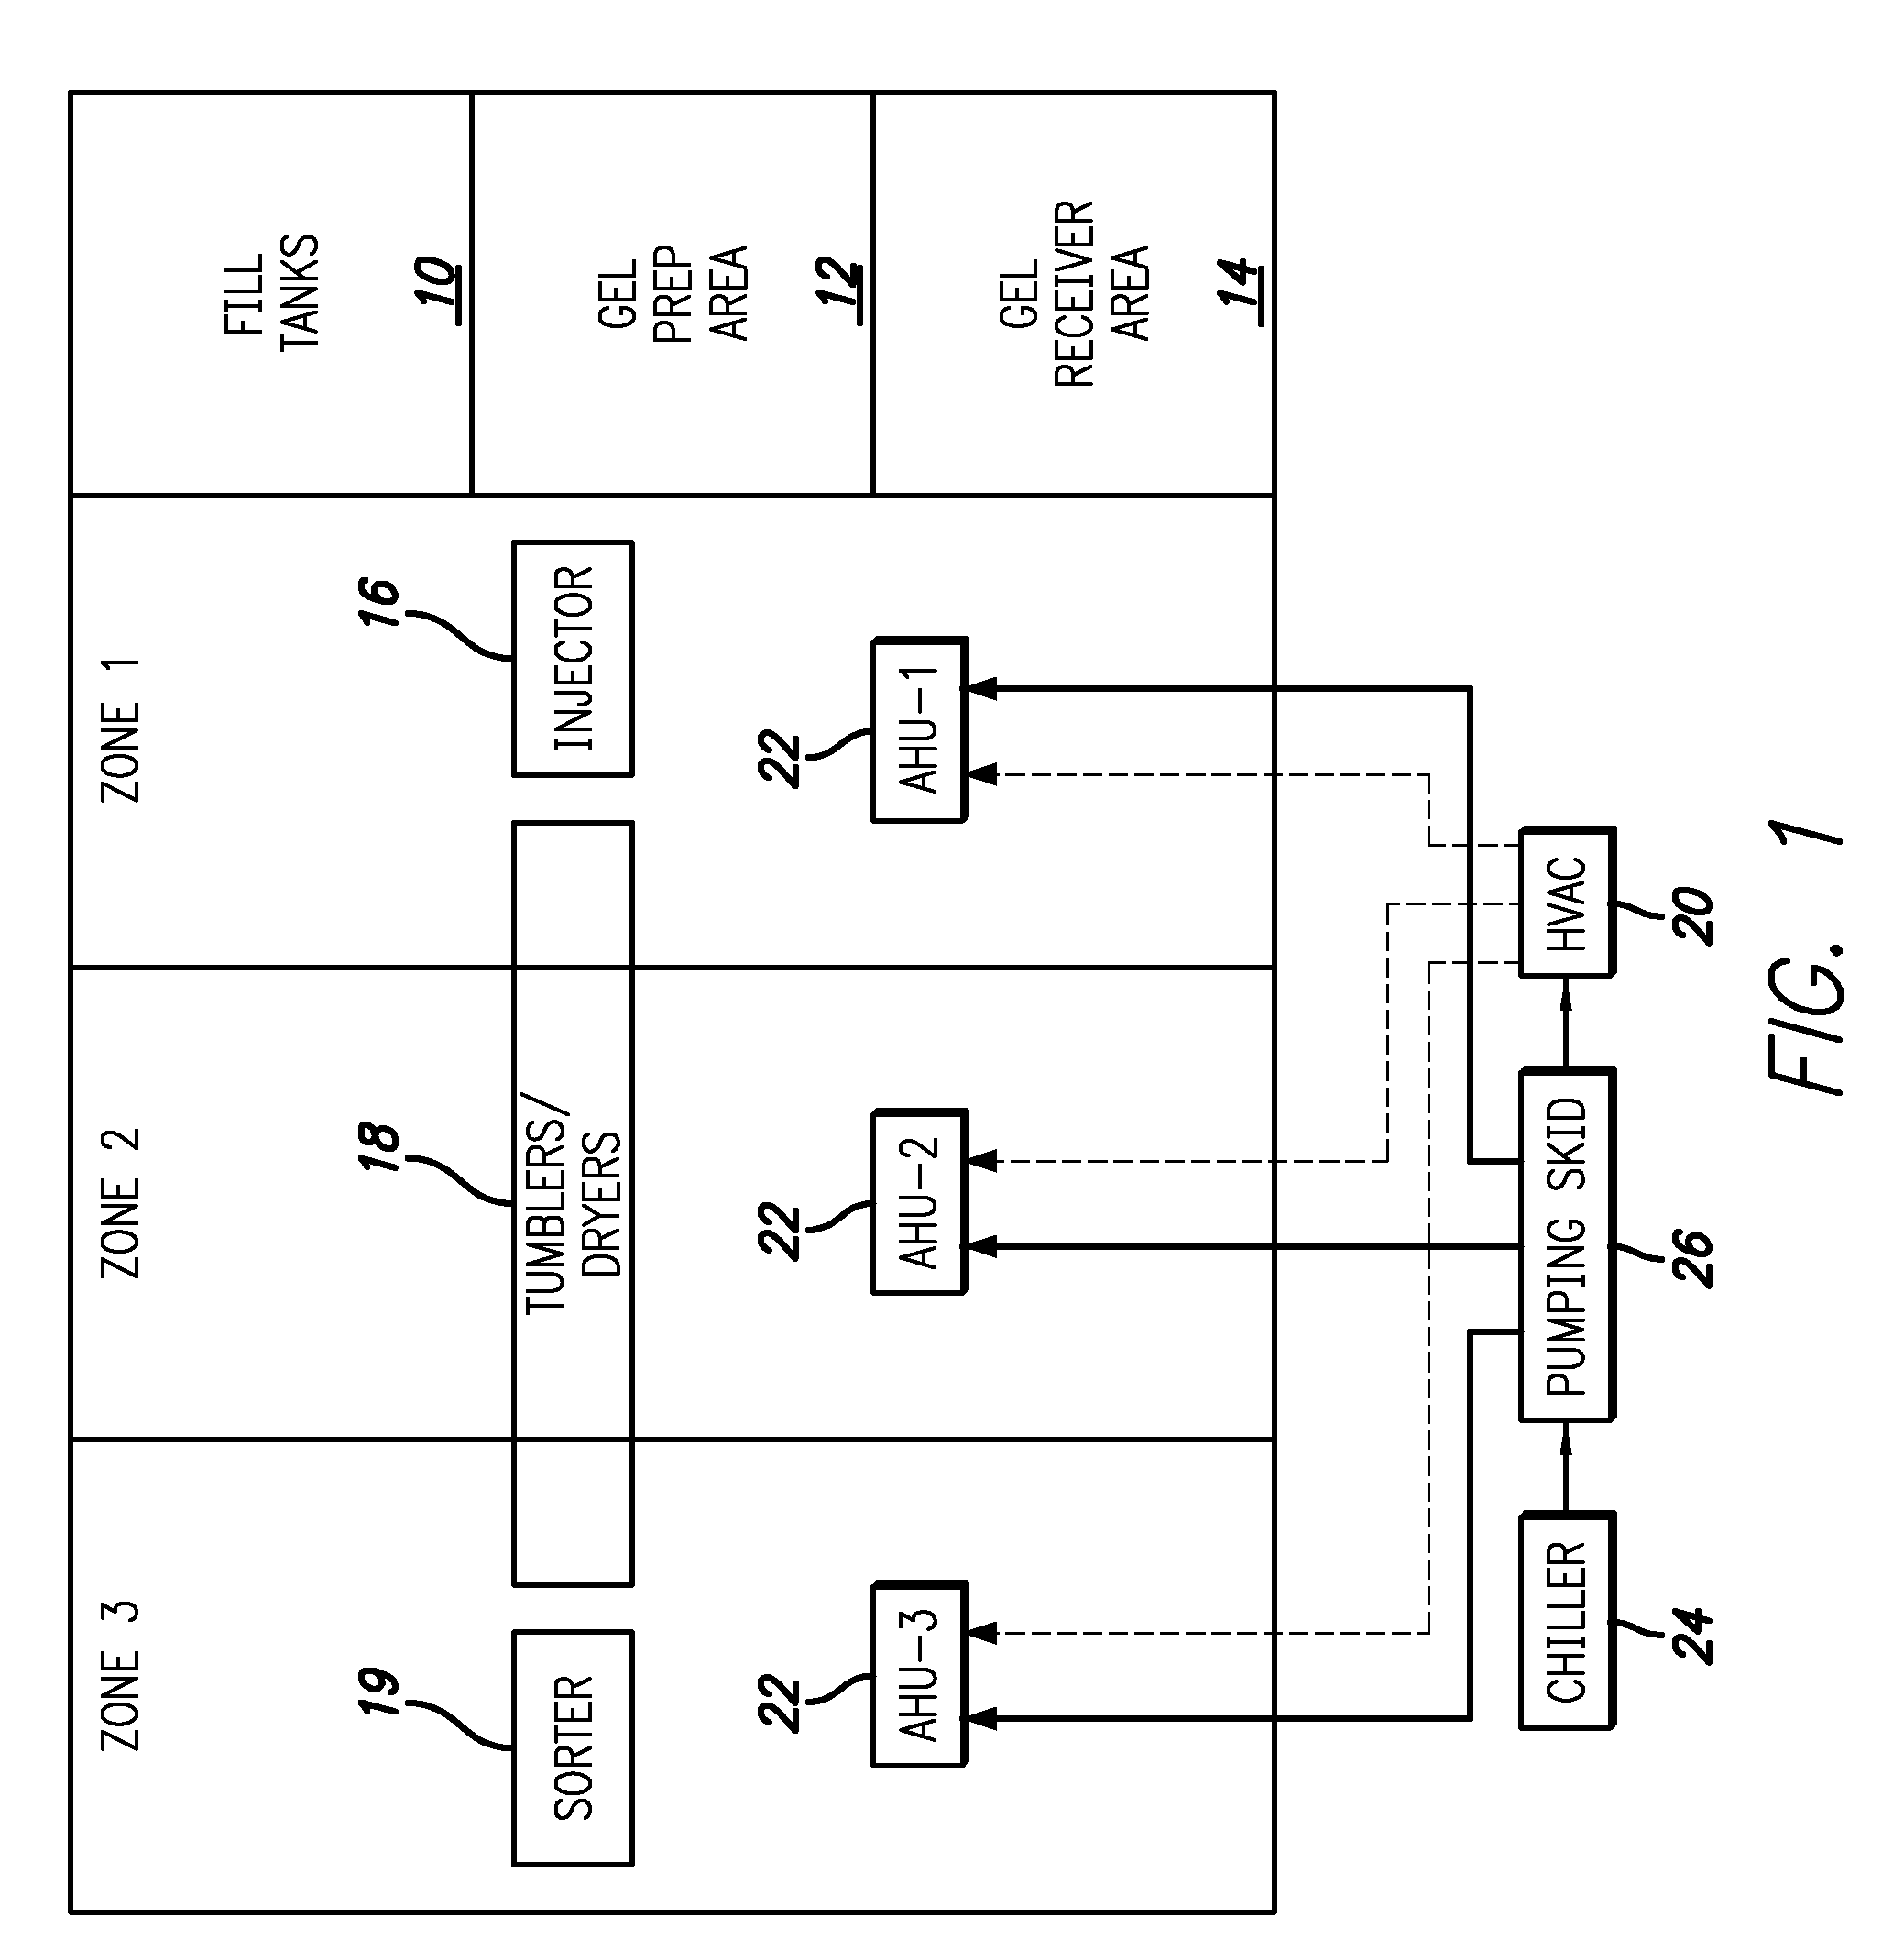 Gelatin capsule formulation and drying system